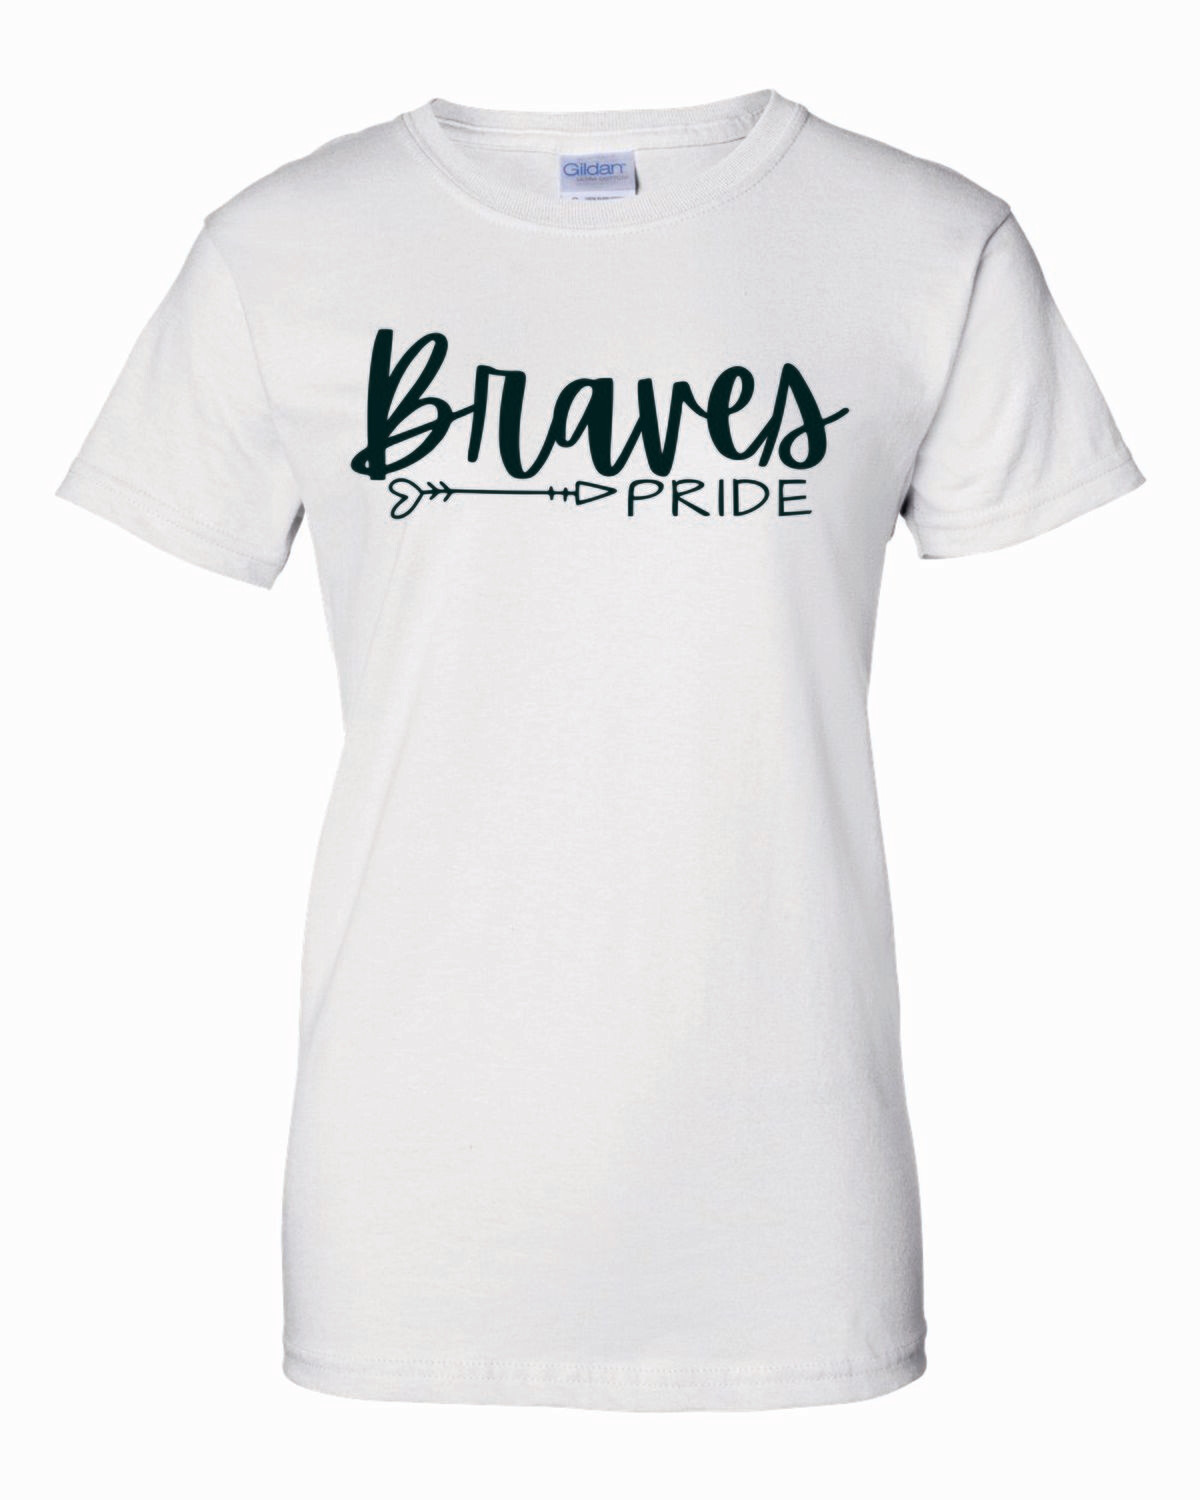 Braves PRIDE Women's T-shirt, 2 colors available